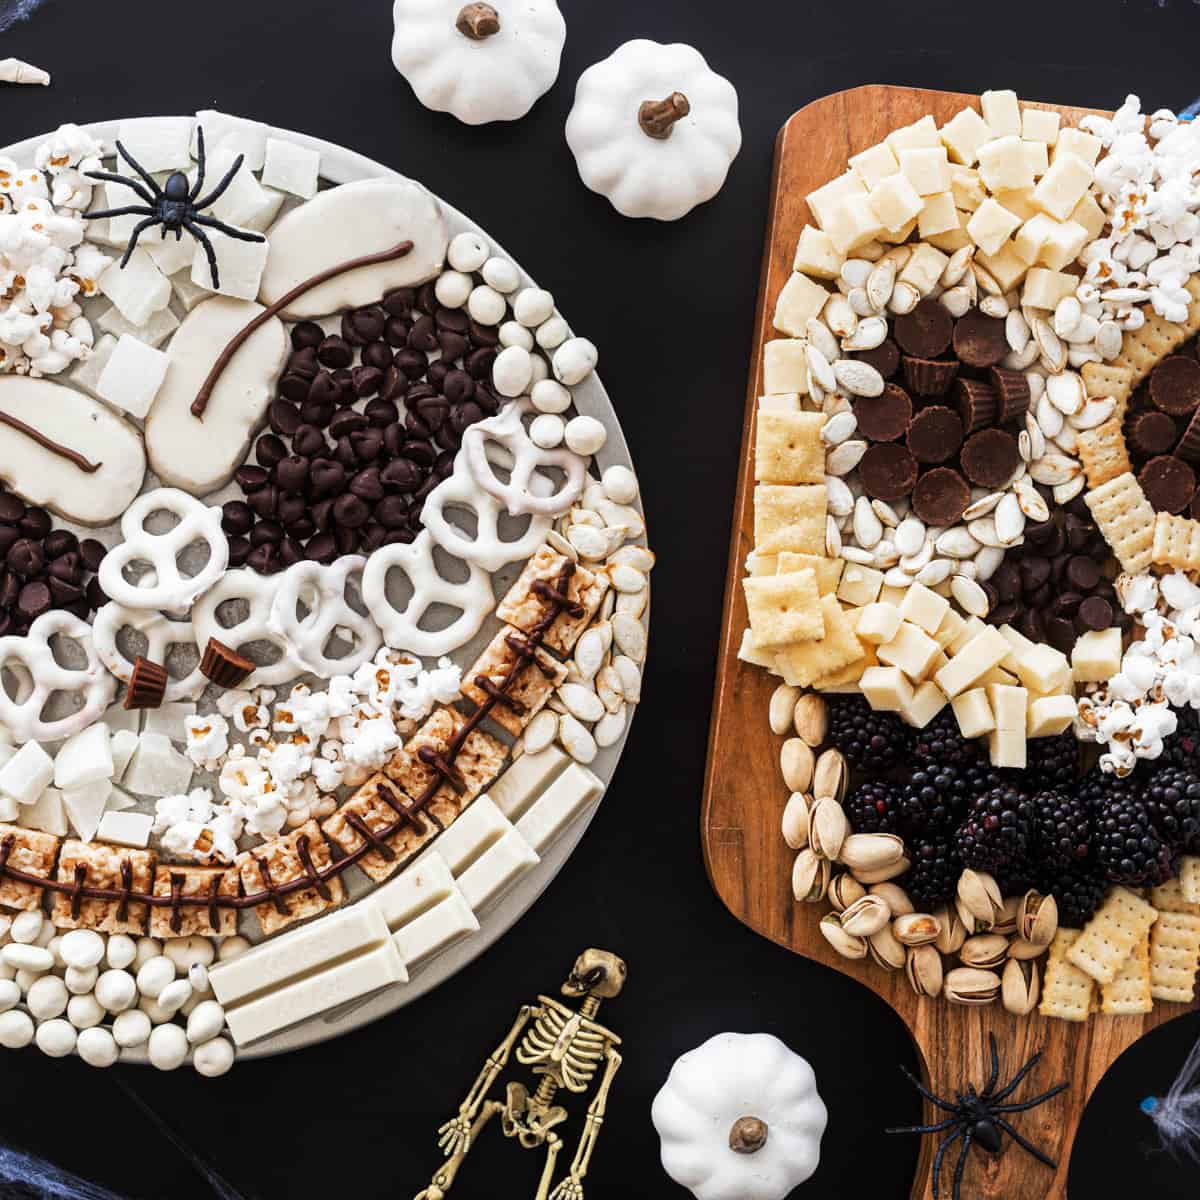 Jack Skellington and Skull Party Platters for Halloween. 